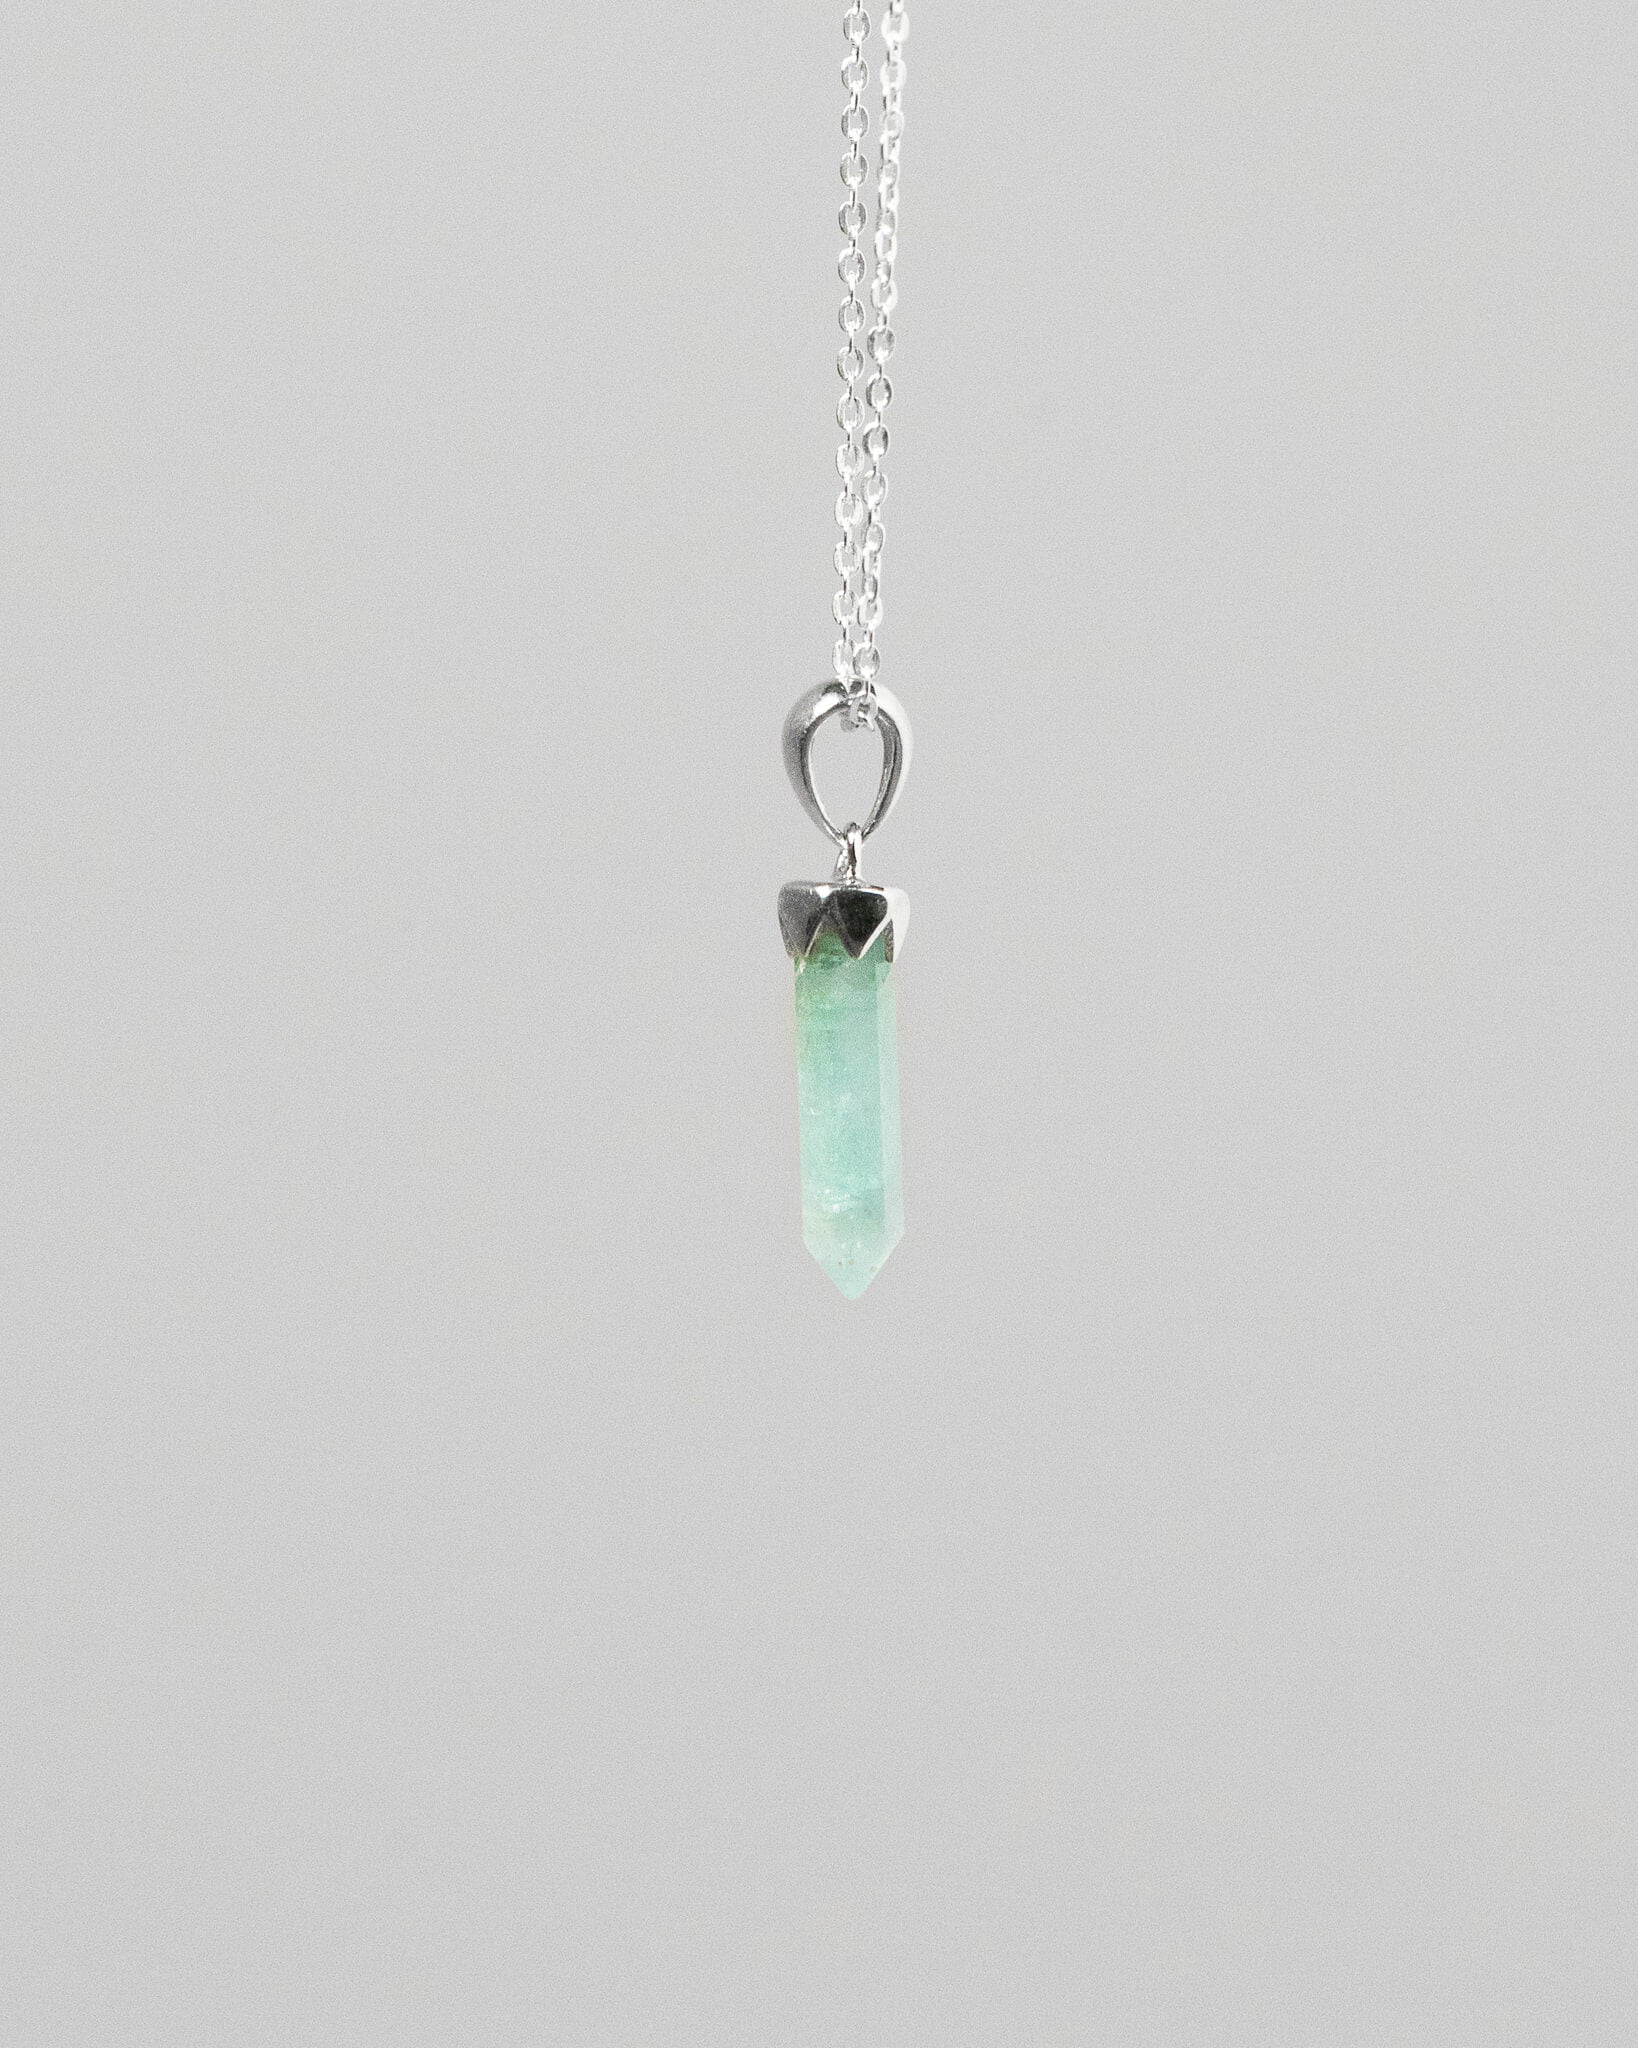 Aquamarine Crystal Necklace - 925 Sterling Silver